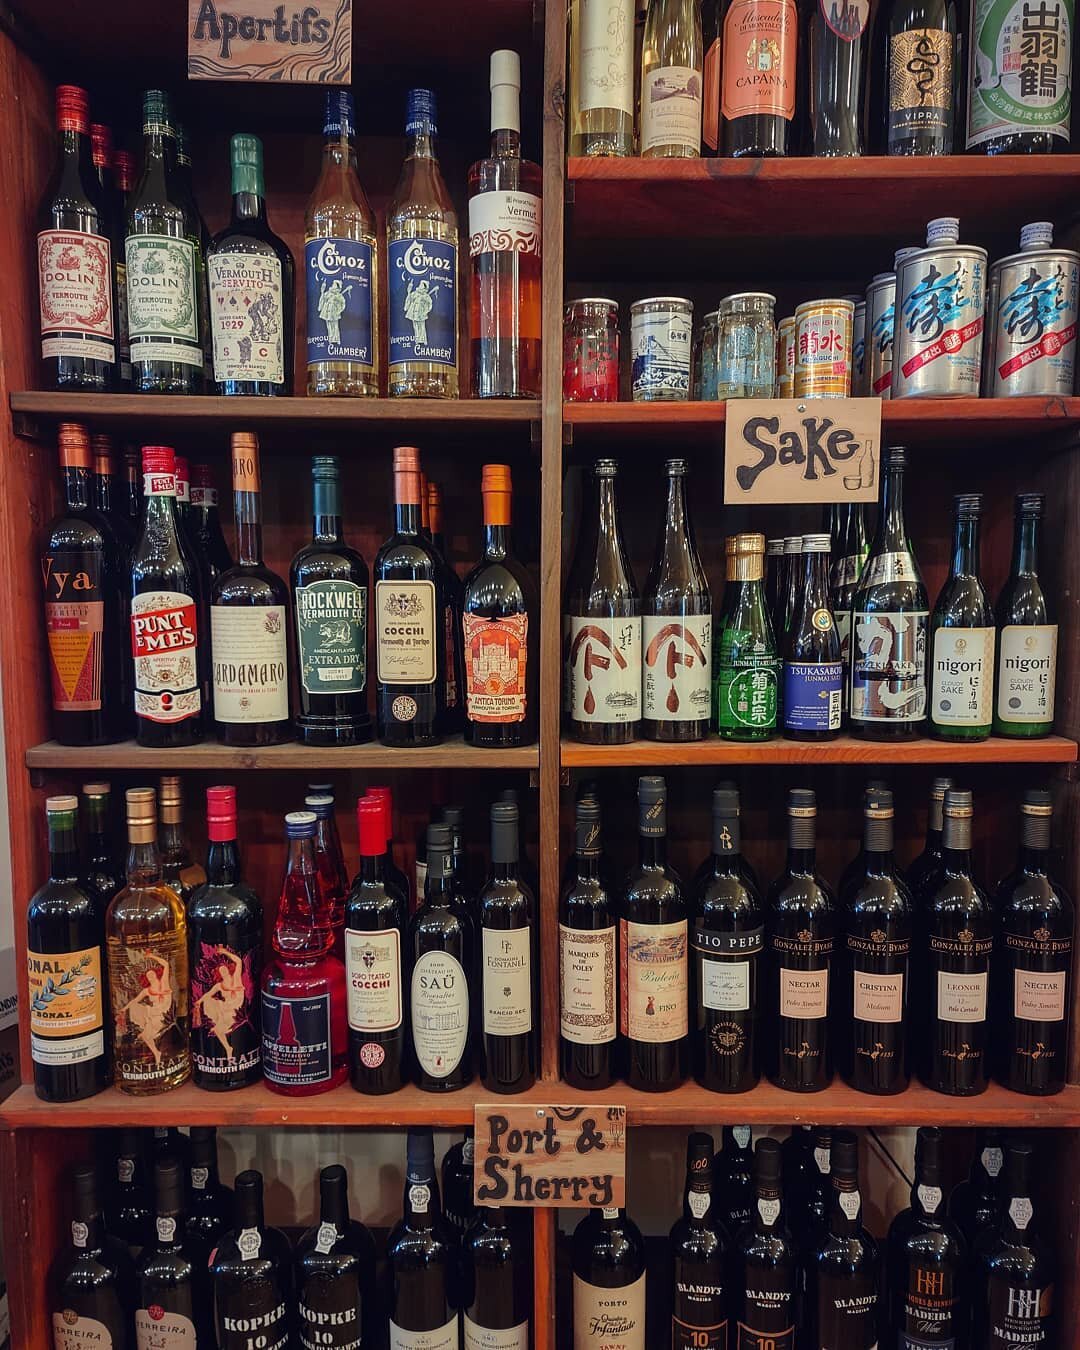 Think outside the box for cold season libations. It's not all about table wine and beer. Vermouth, amaro, aperitifs, all that we carry are beautiful on a cold winter night neat or over an ice cube. Not to mention port, Madeira, sherry, and other fort